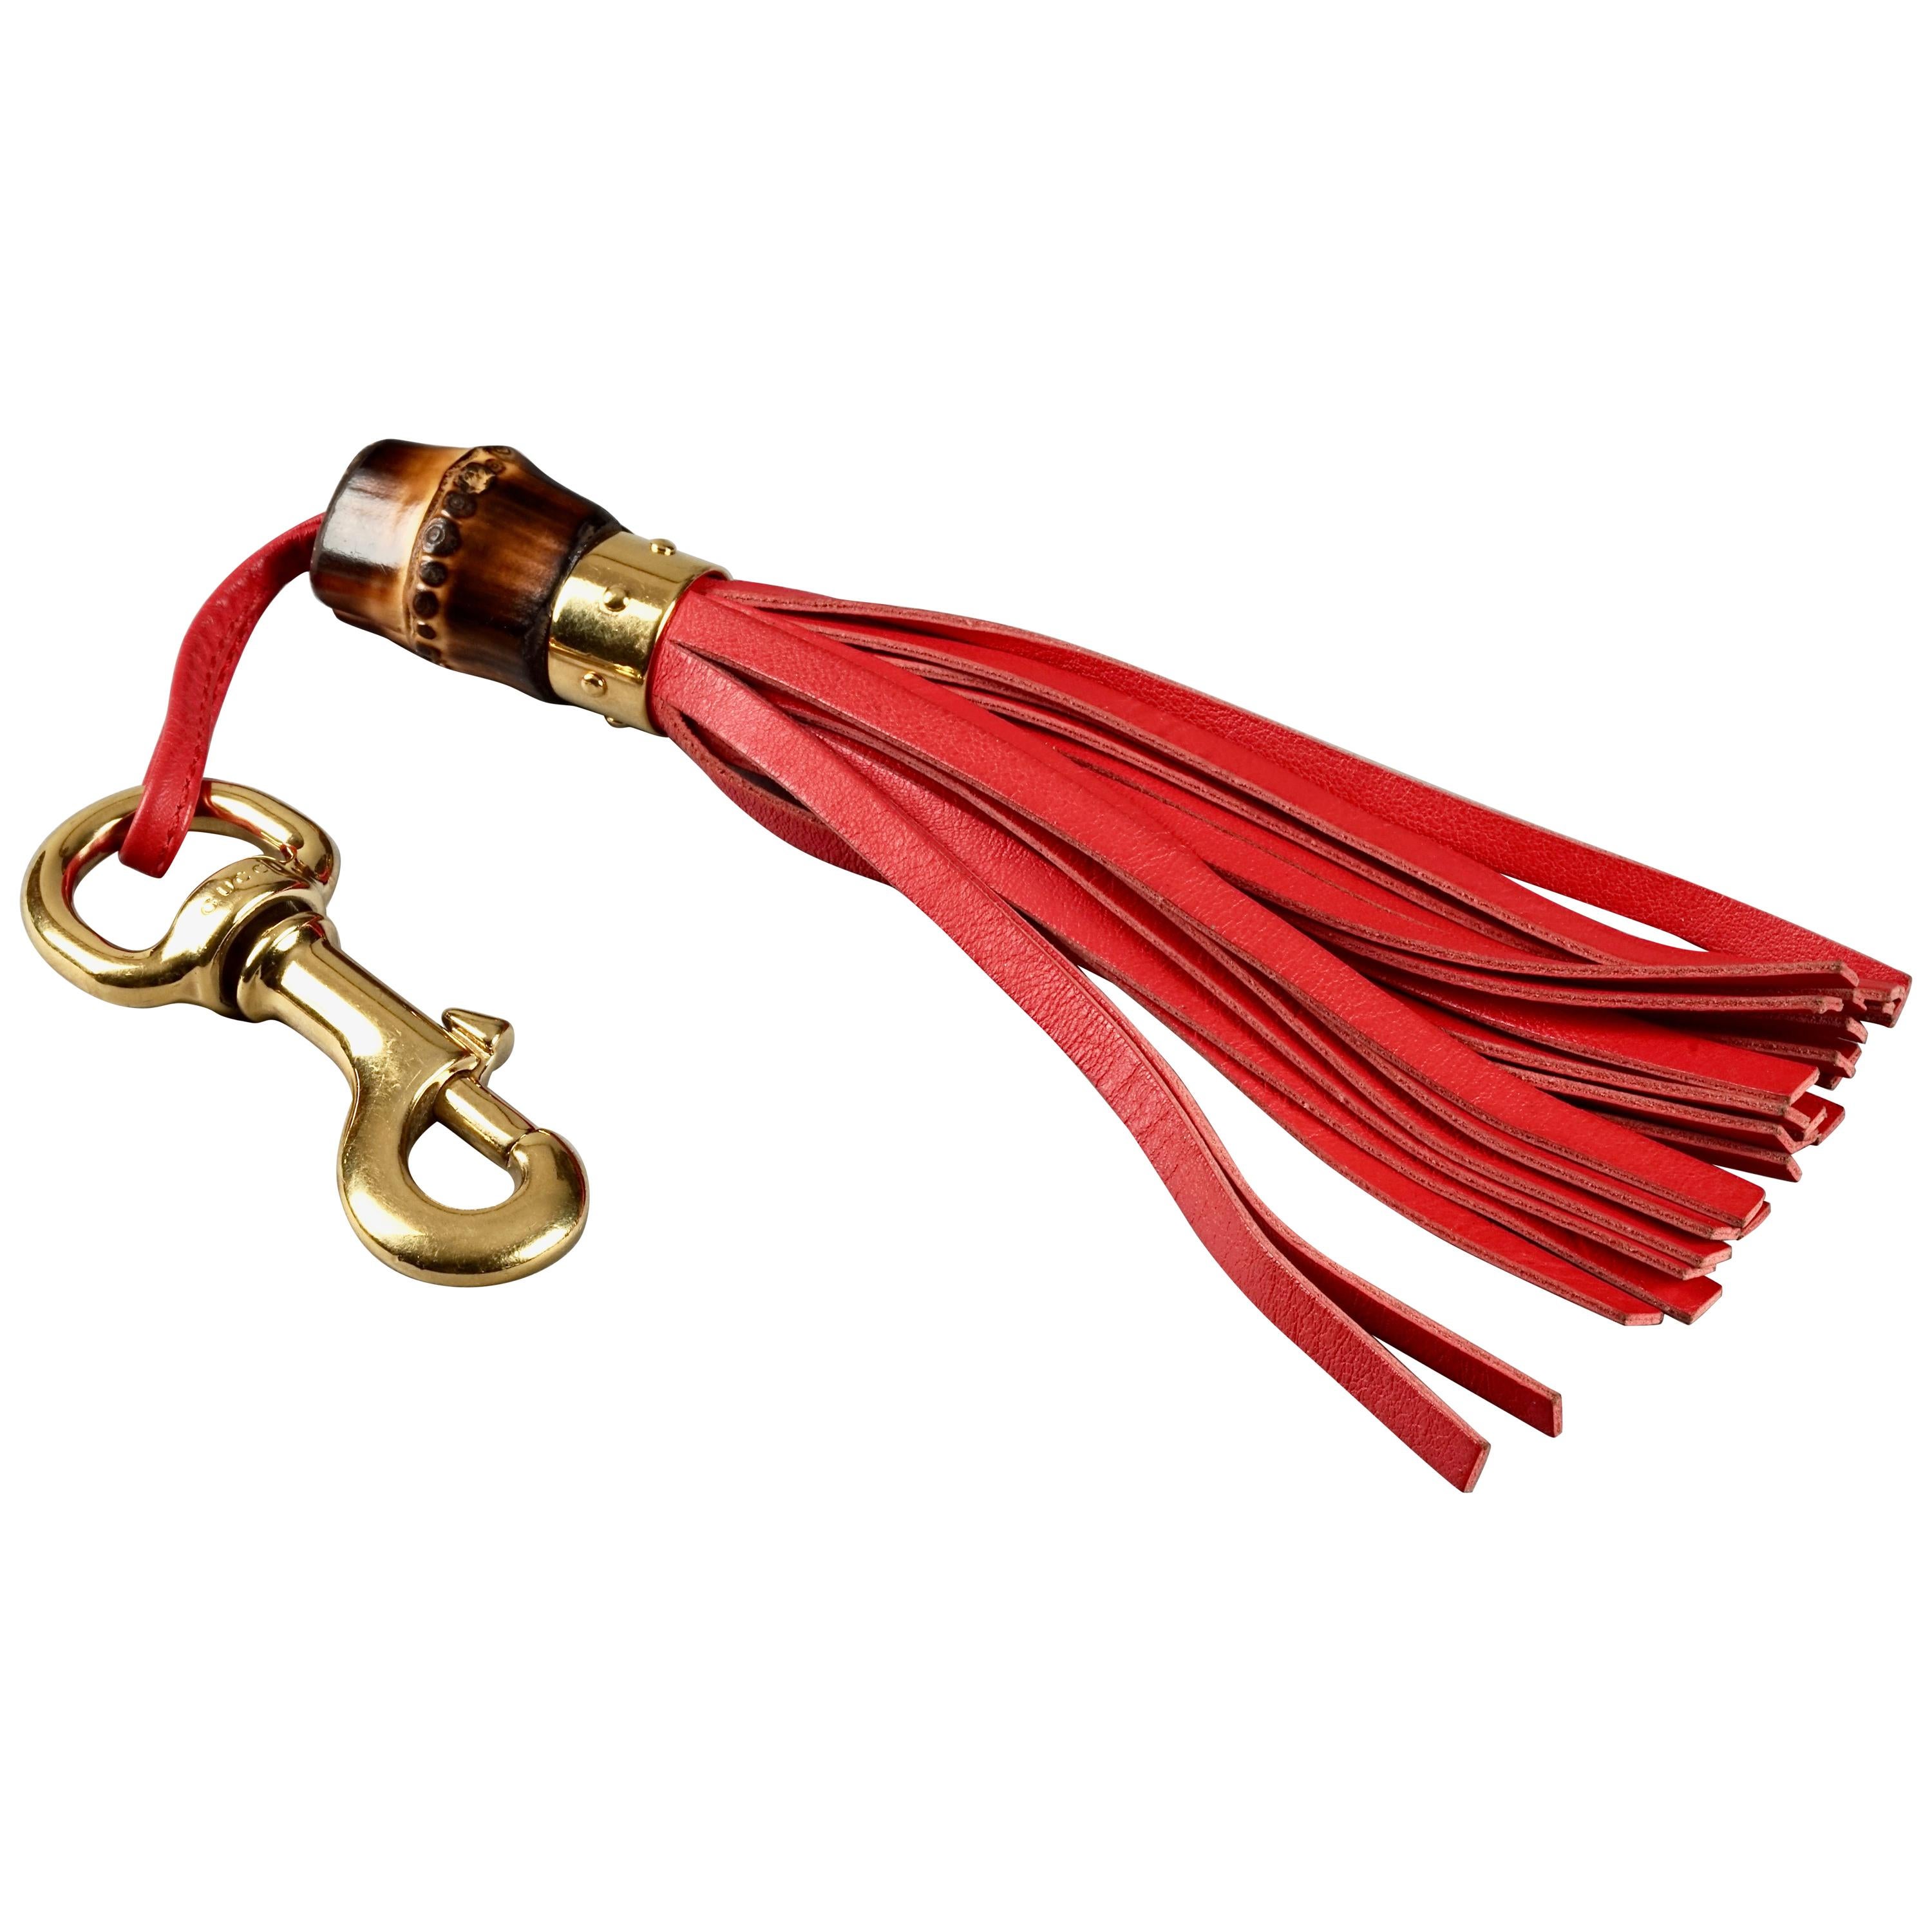 Vintage Ultra Long GUCCI Bamboo Leather Tassel Bag Charm Key Ring Keychain